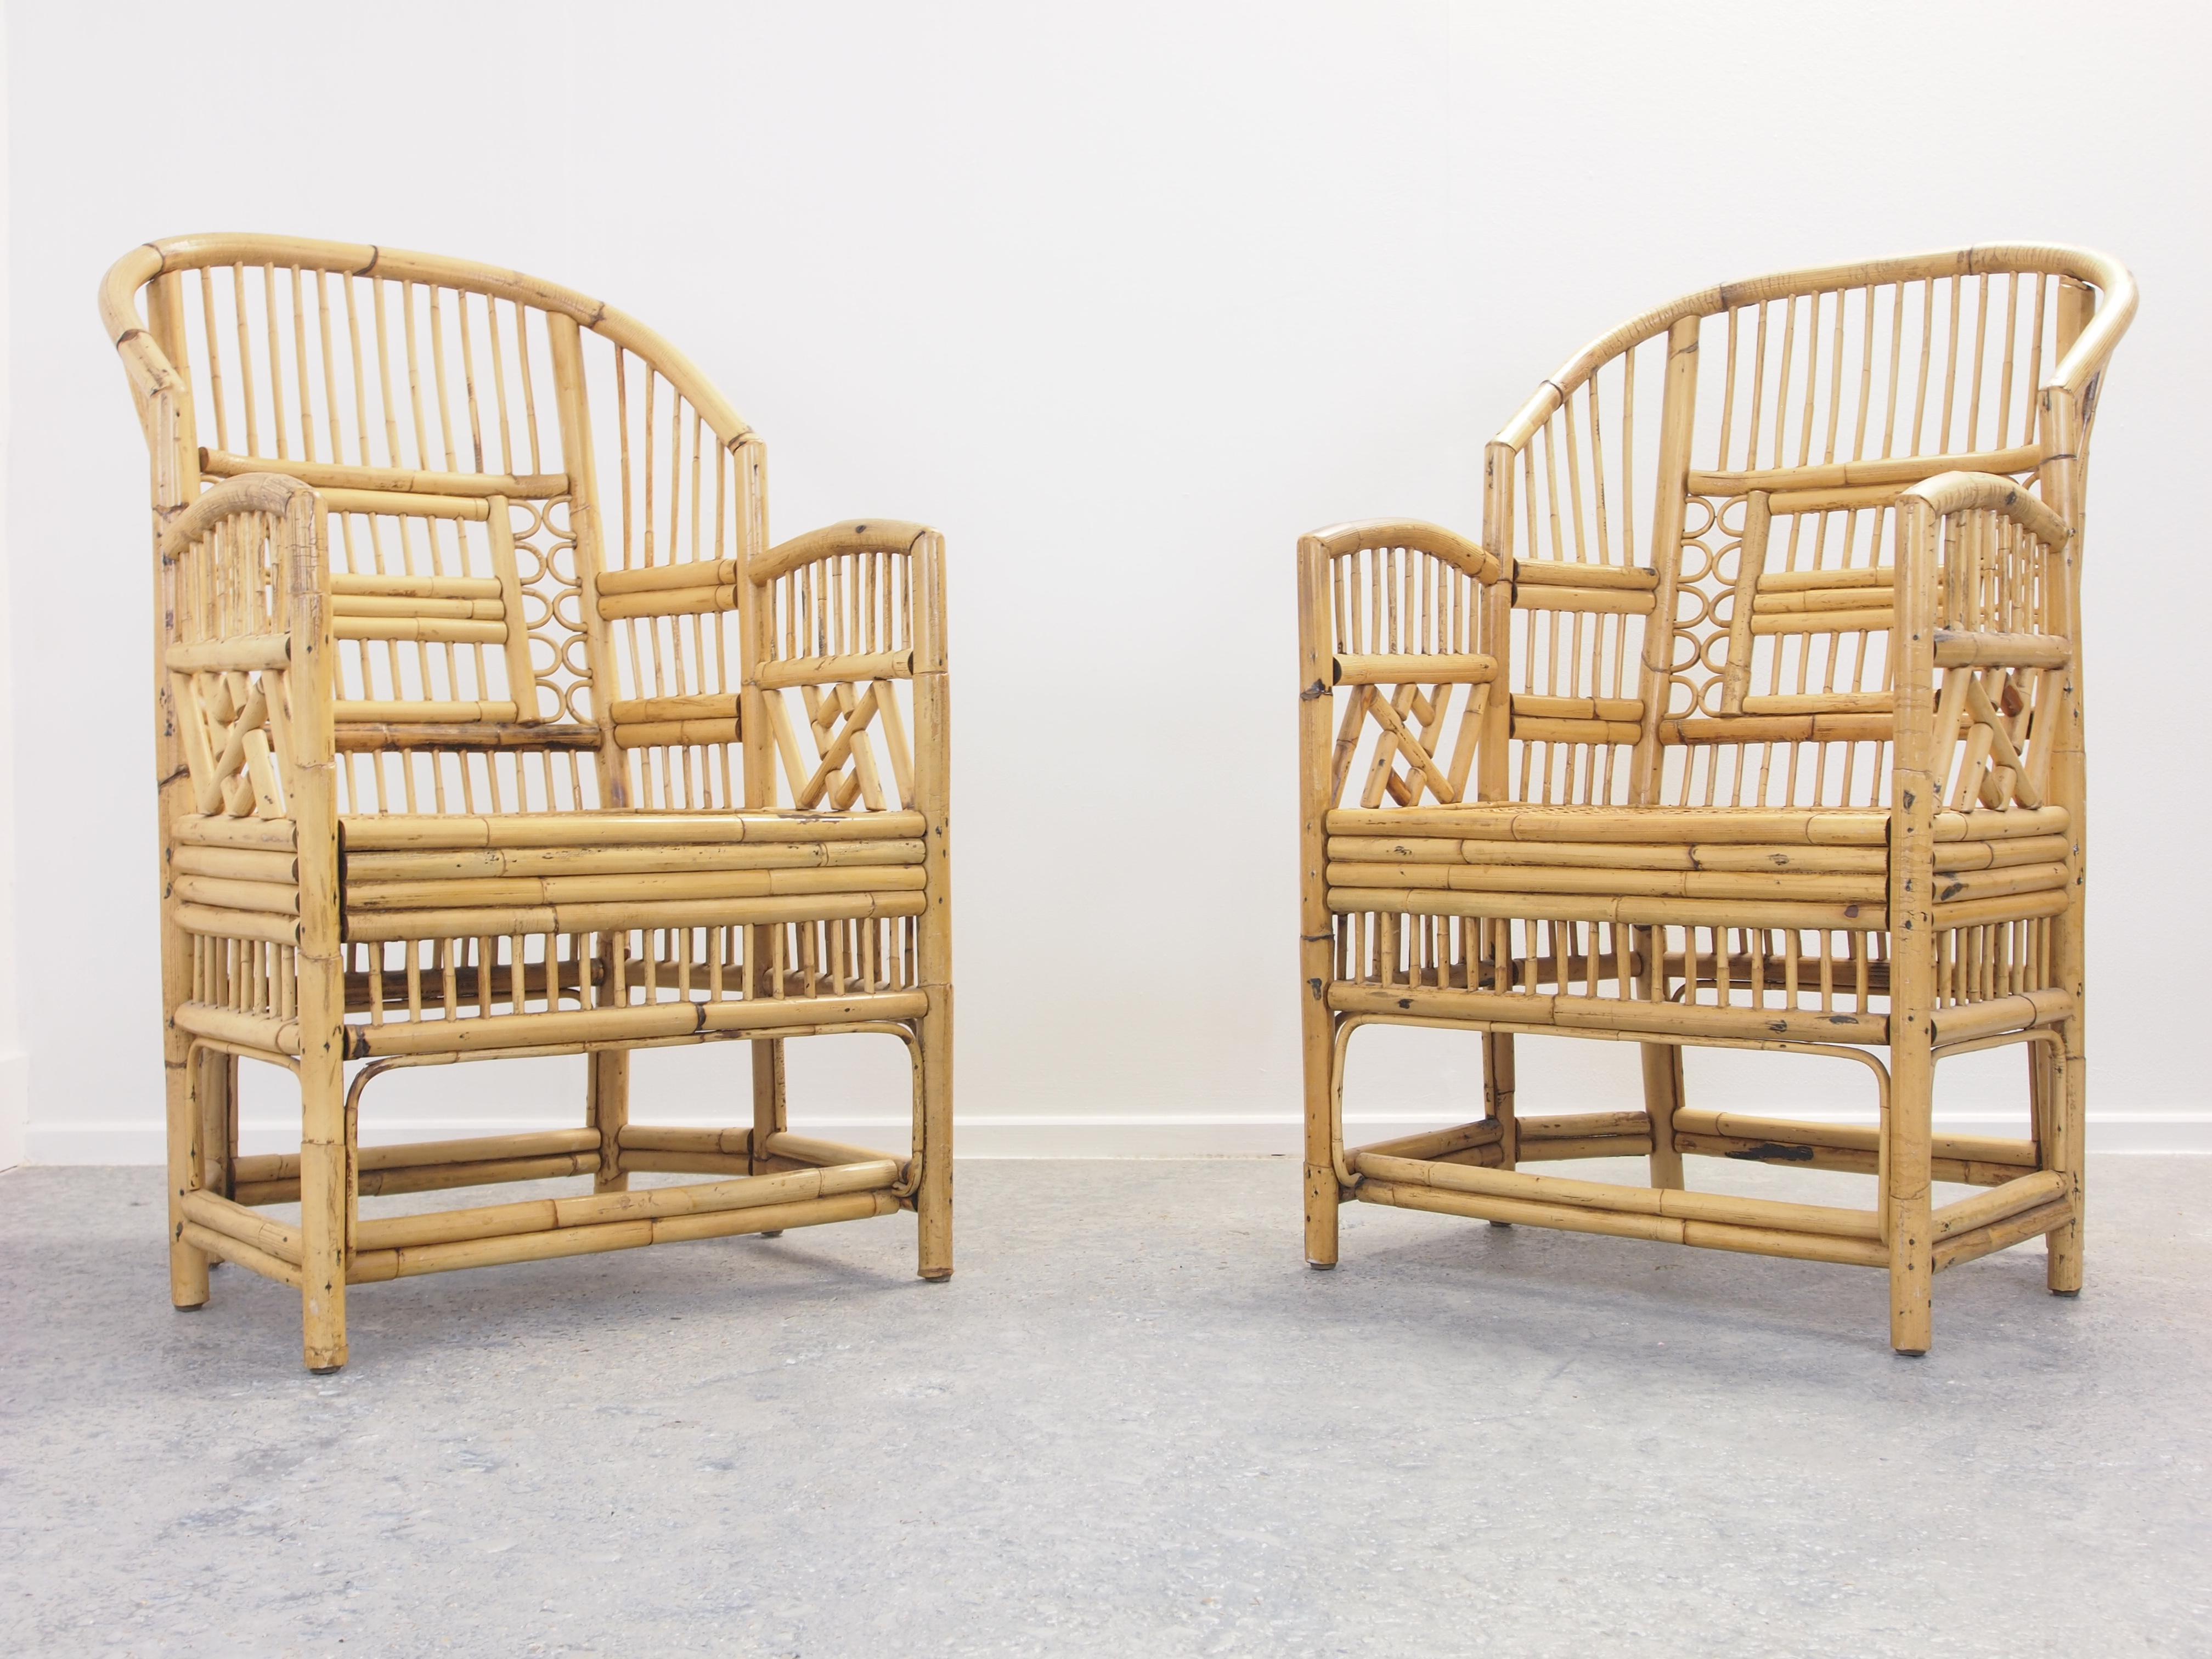 Pair of 2 Vintage Chinese Chippendale/Brighton Pavilion Rattan Chairs (Korbweide)